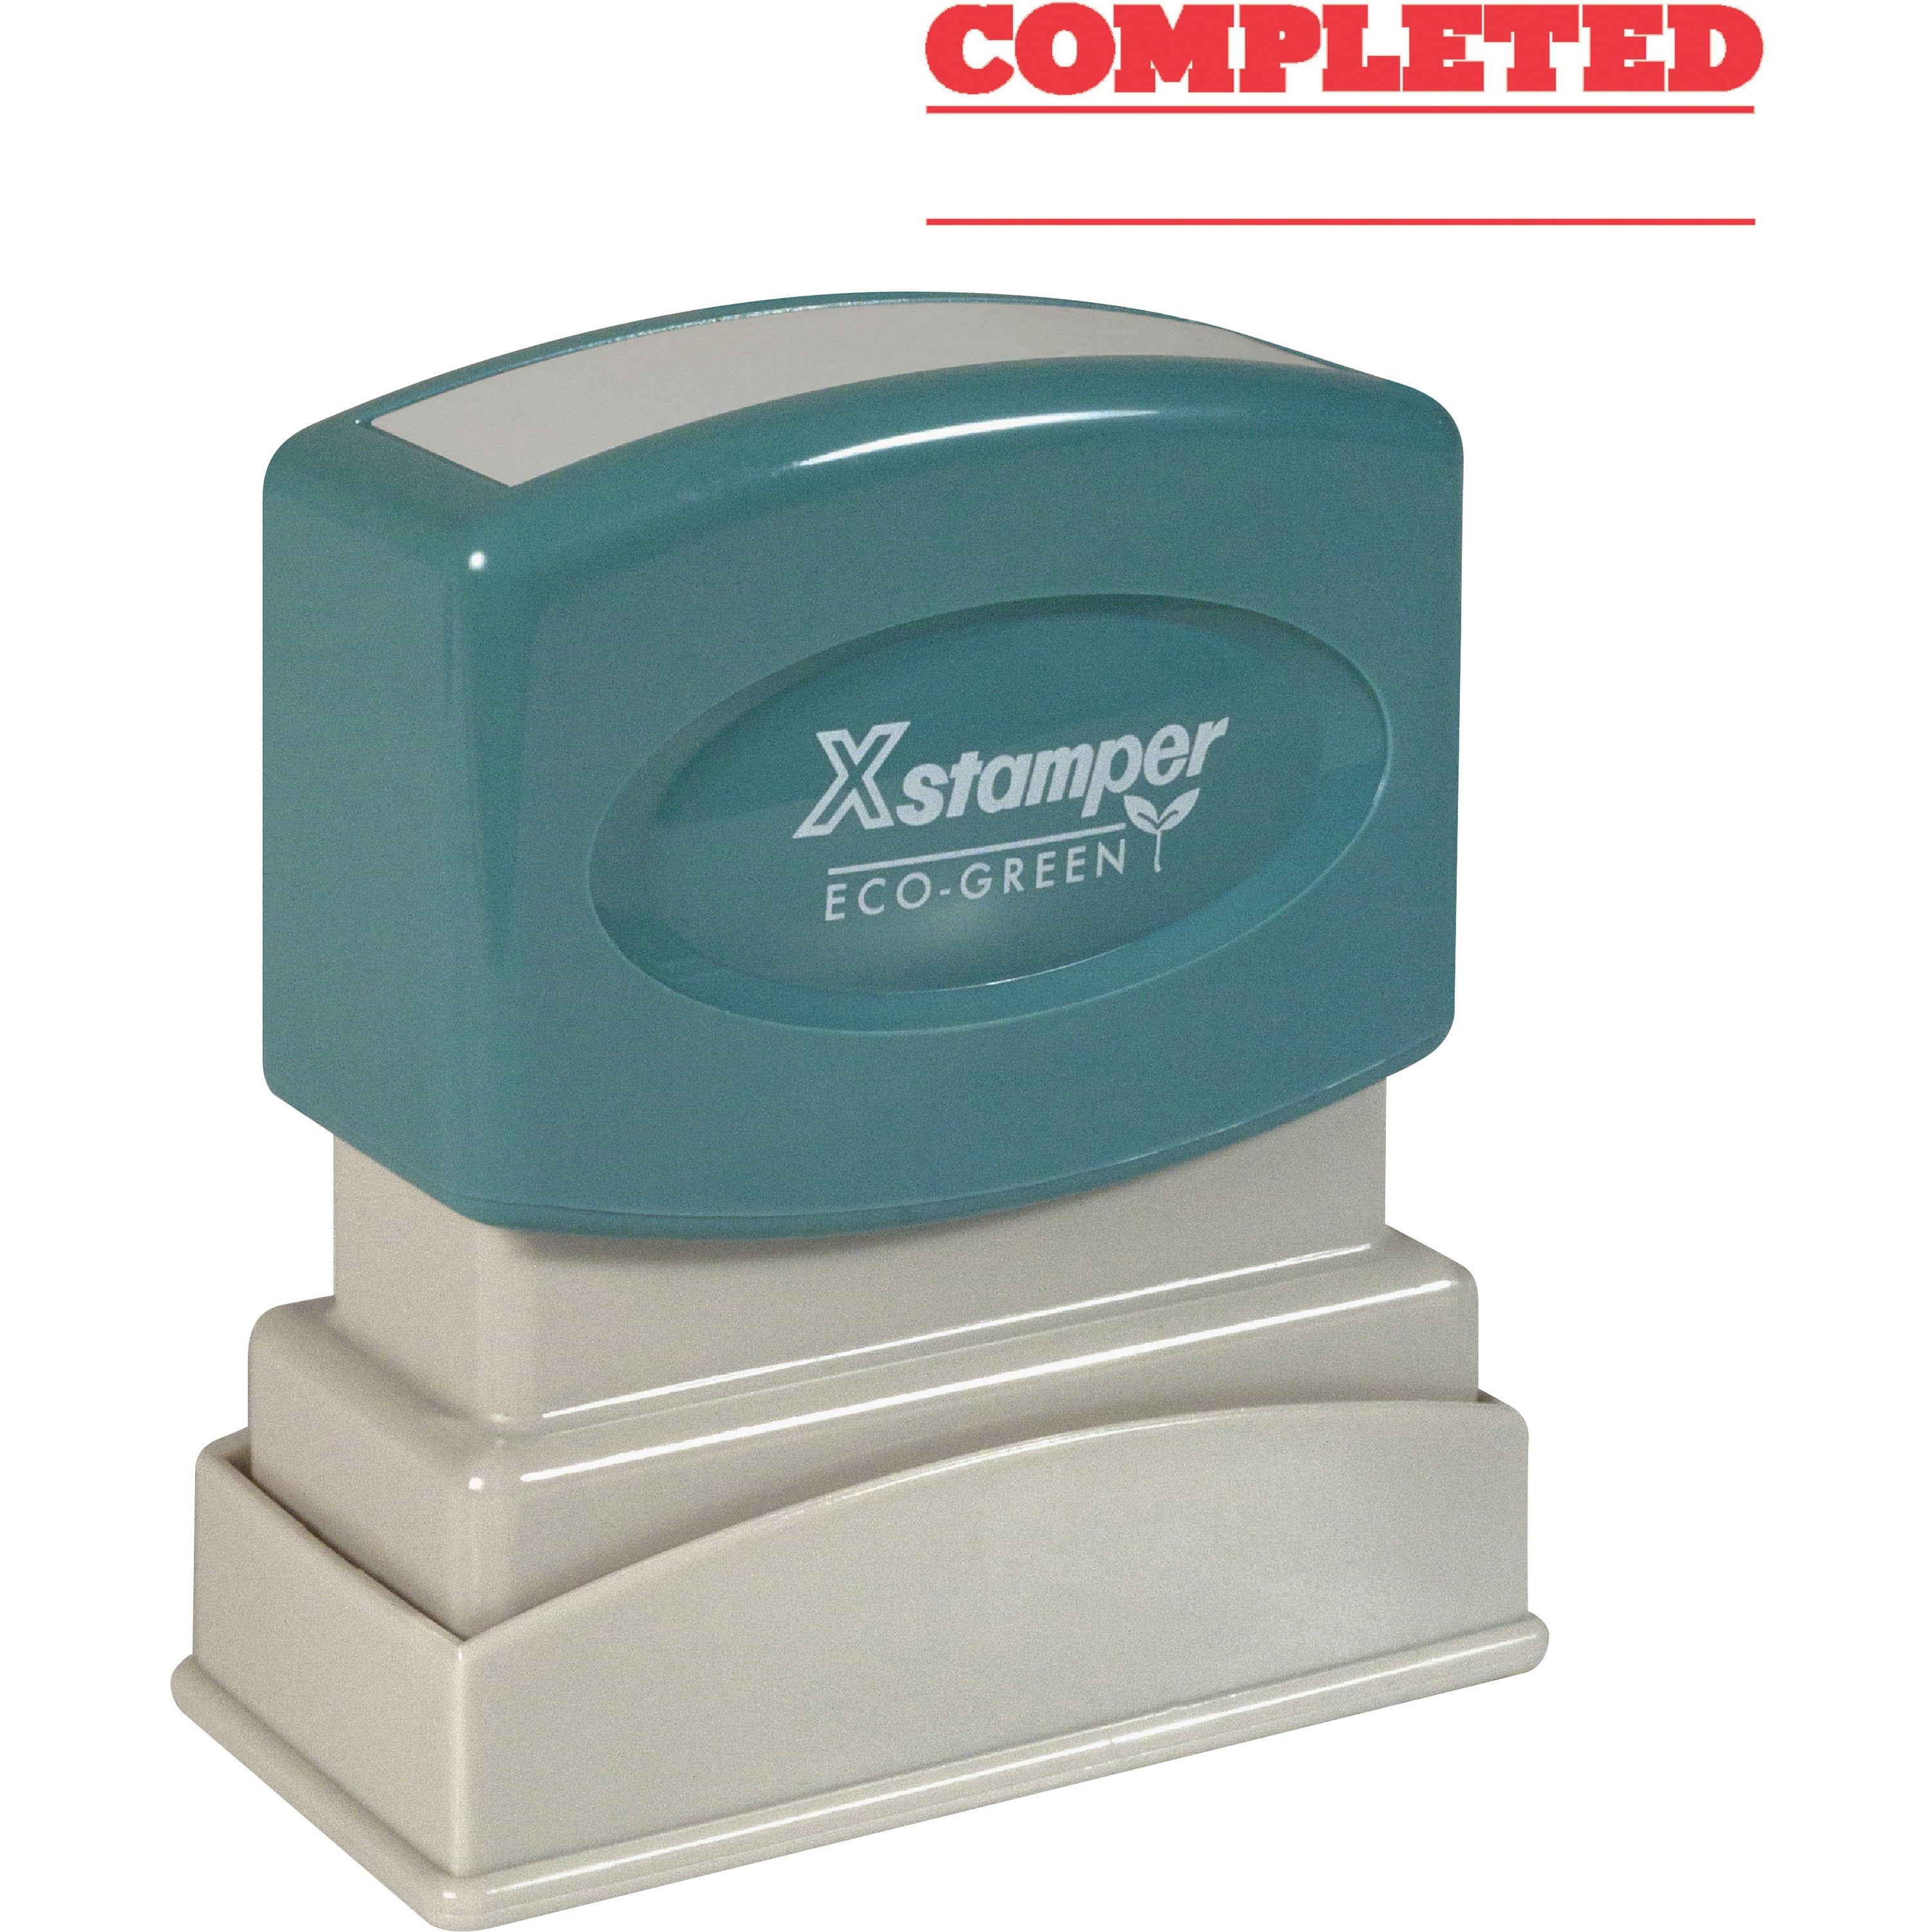 Xstamper COMPLETED Stamp - Message Stamp - "COMPLETED" - 0.50" Impression Width x 1.63" Impression Length - 100000 Impression(s) - Red - Recycled - 1 Each - 